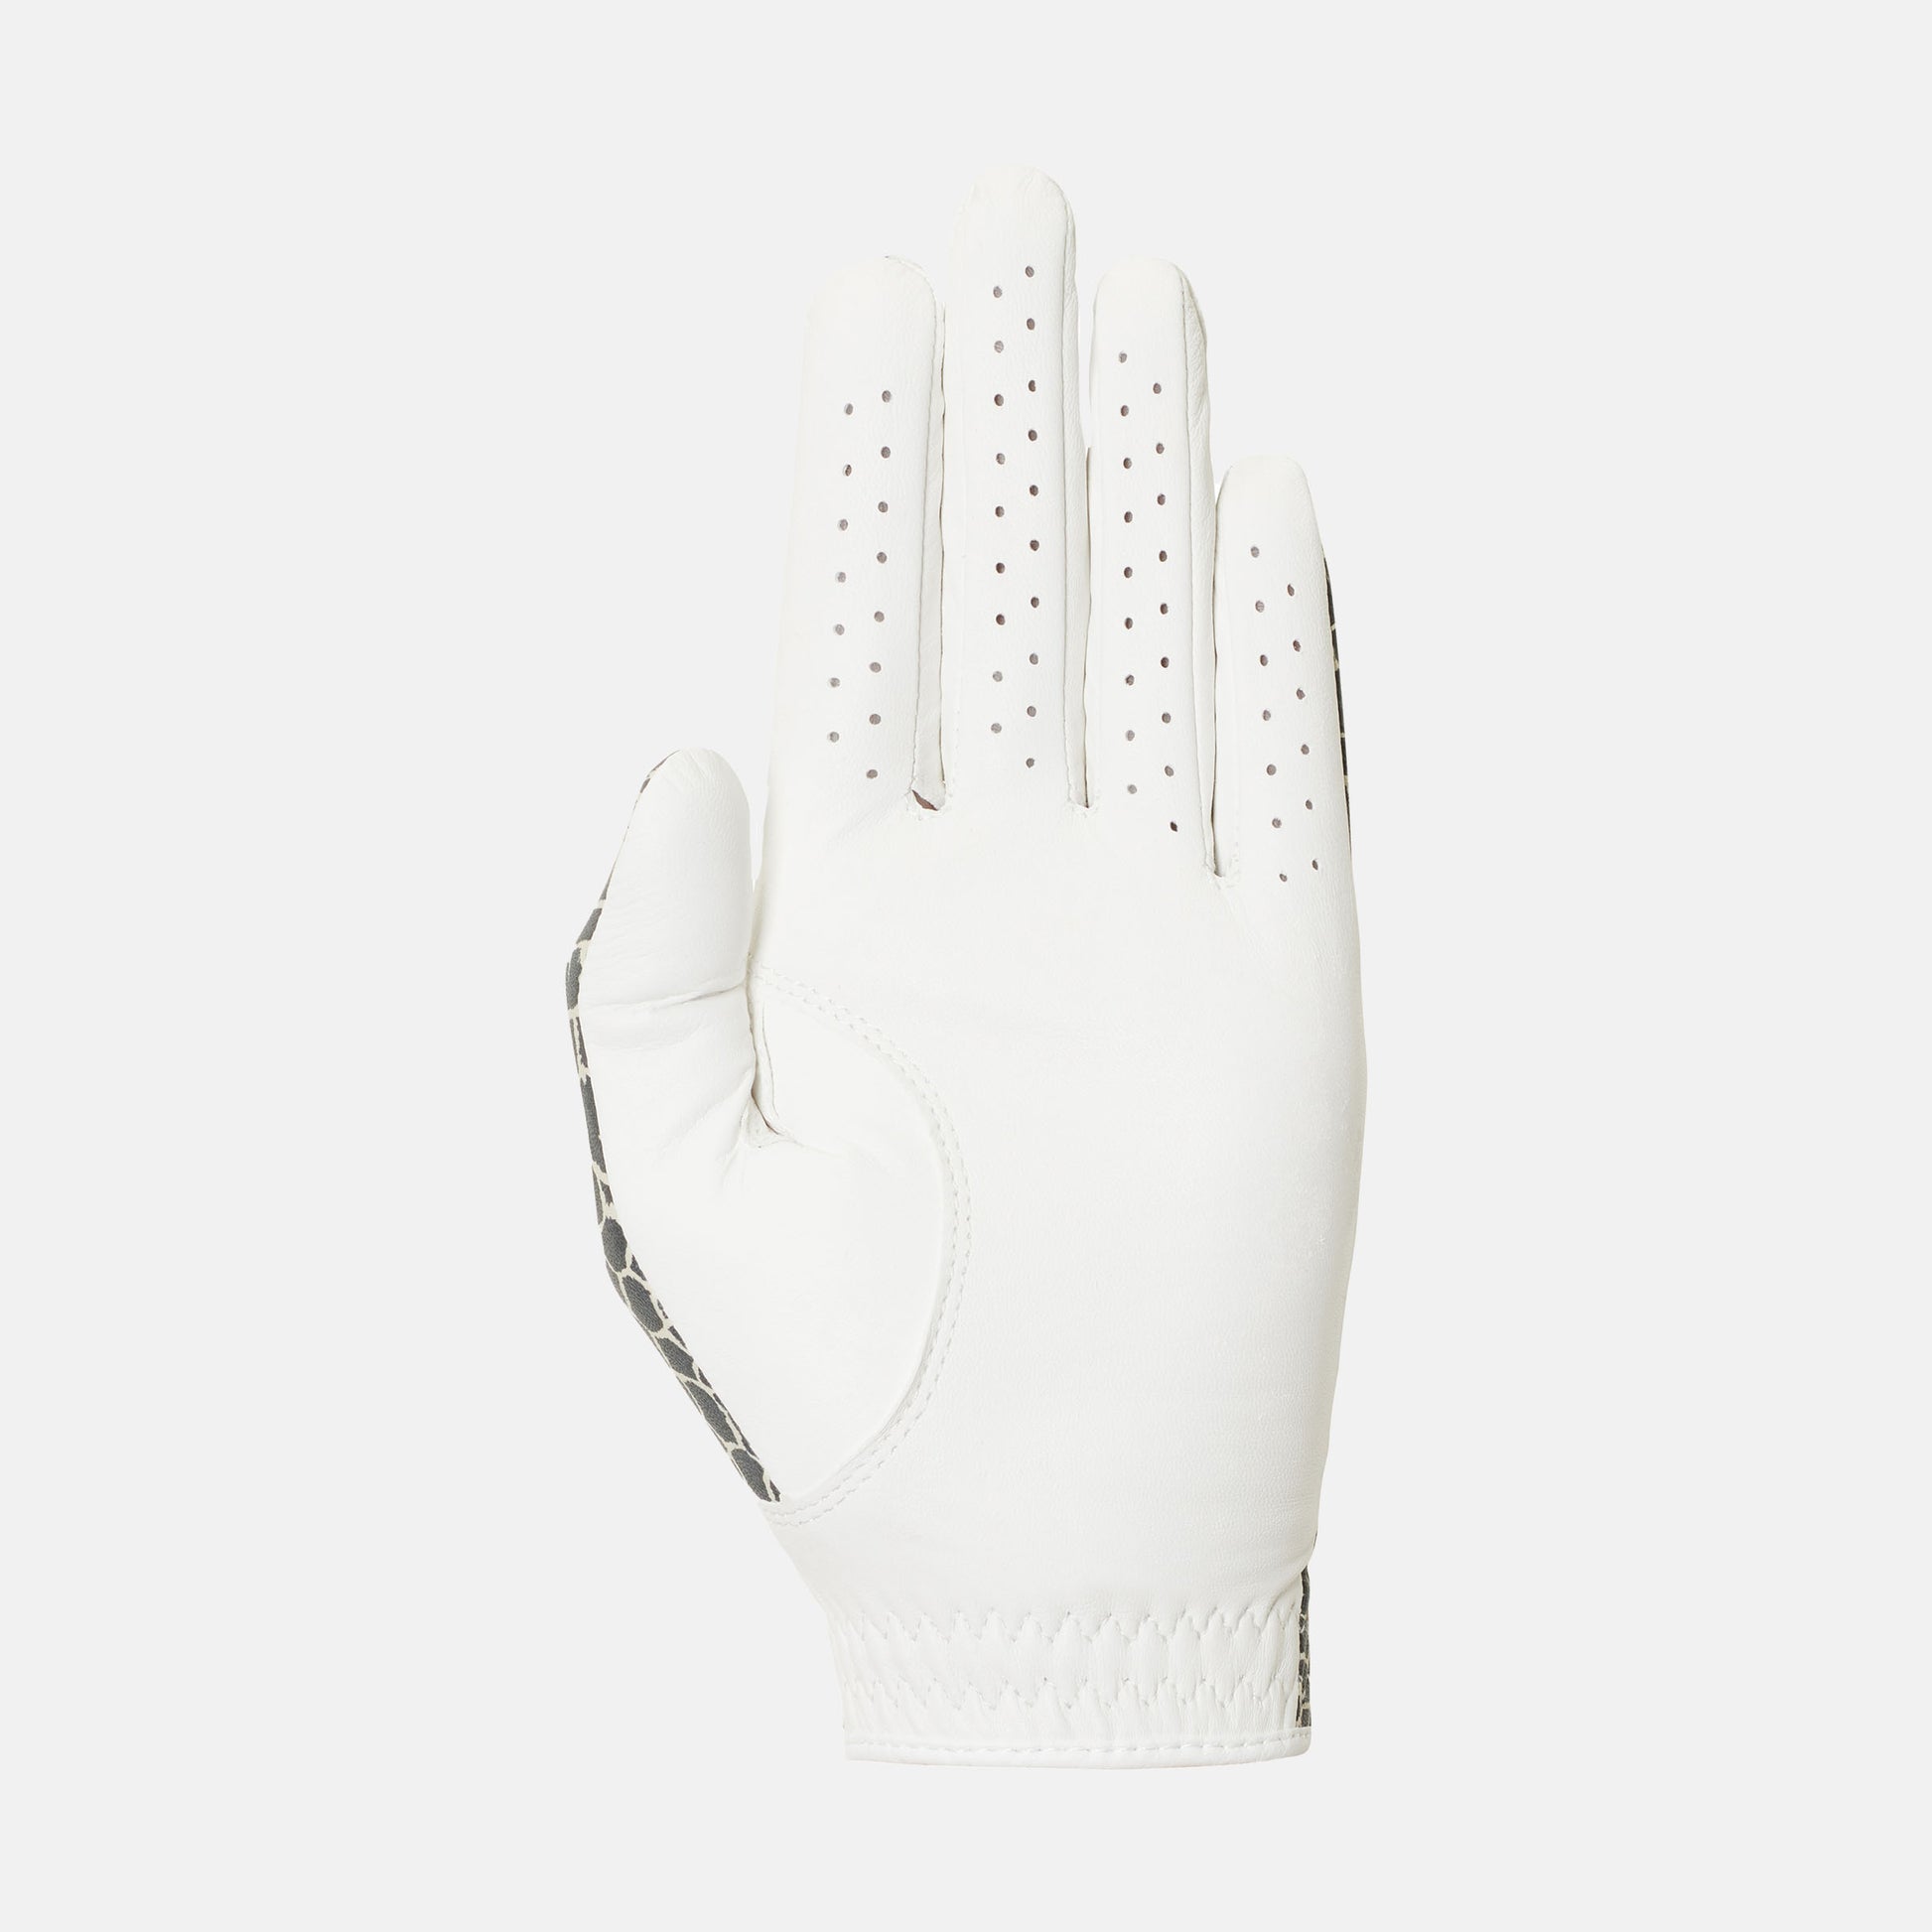 Designer Pro Women's left handed golf glove with Premium selected Cabretta leather and microfibre leather